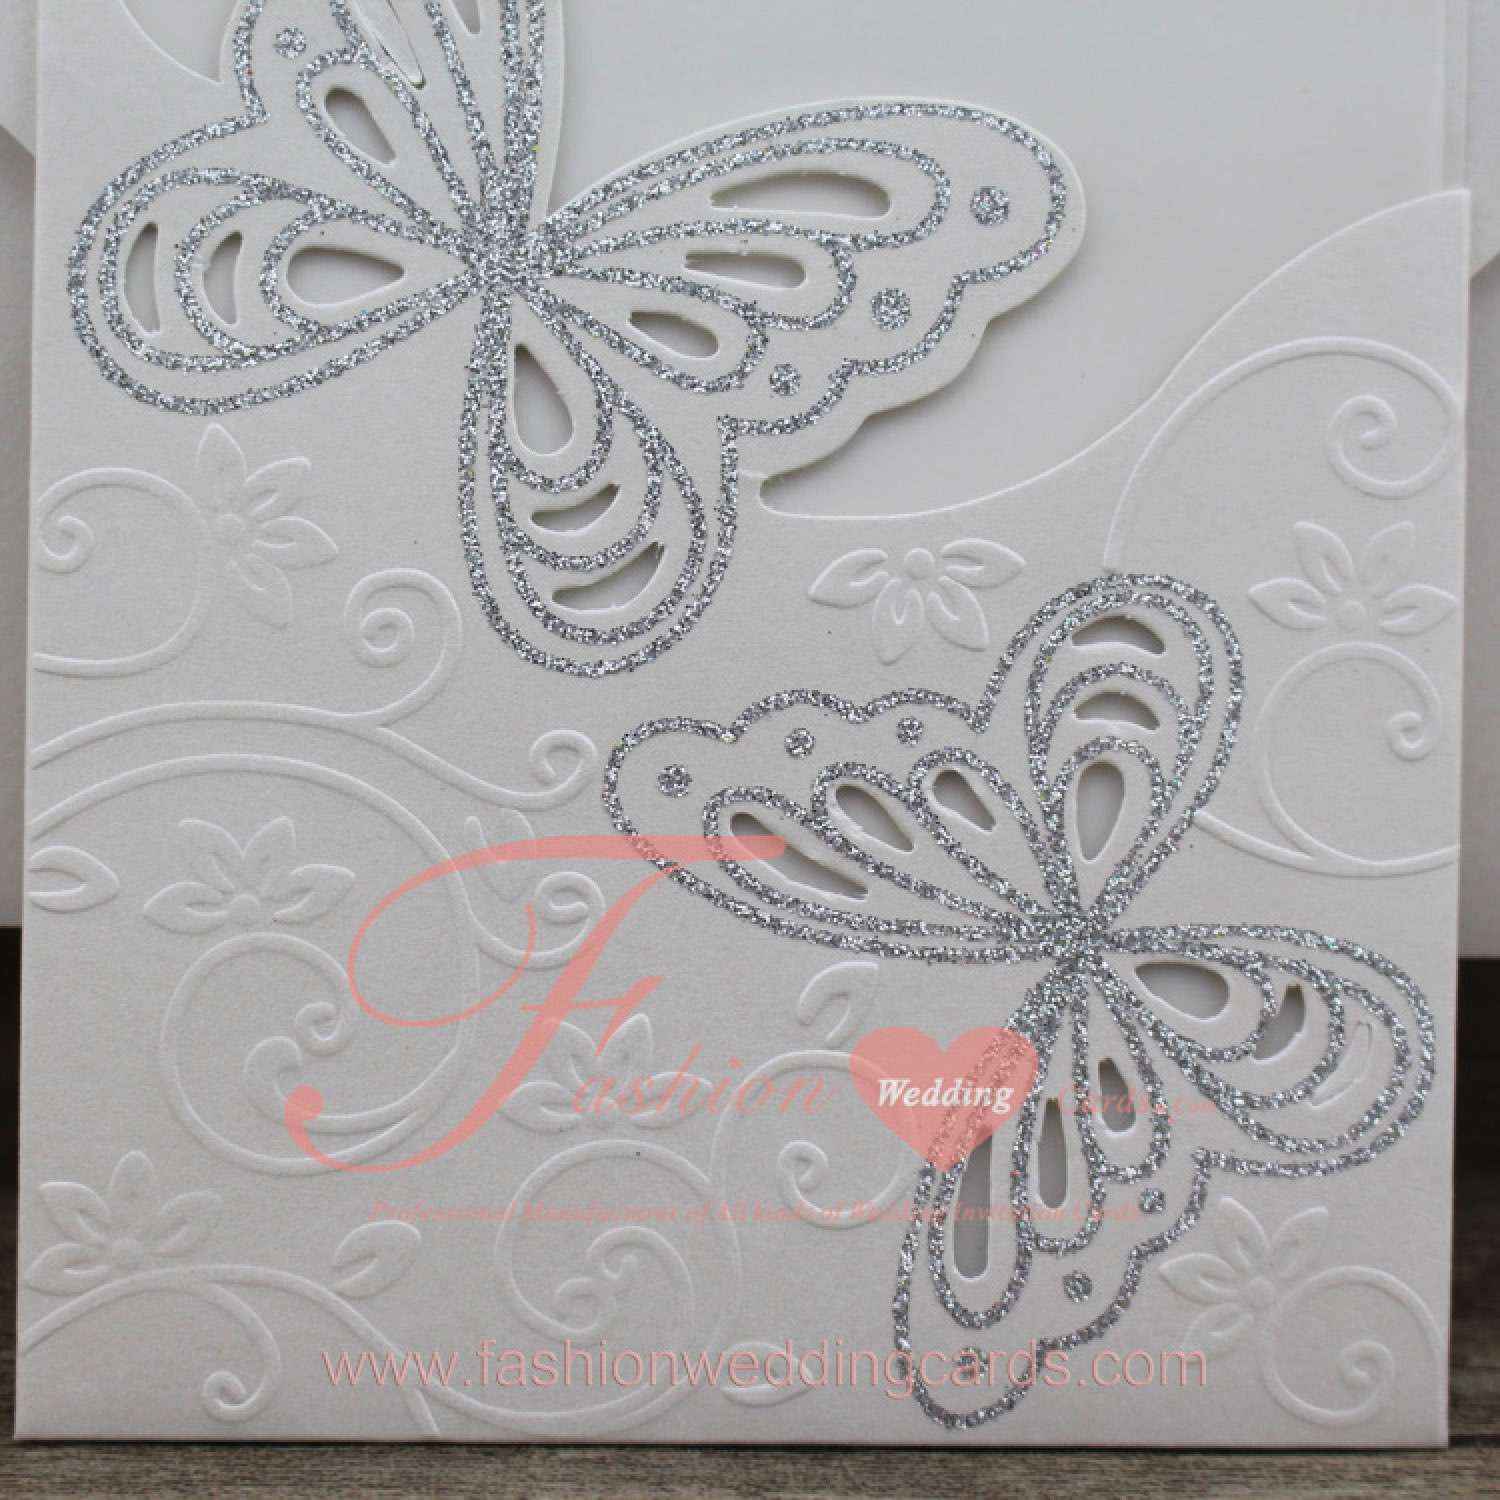 Online Pocket Wedding Invitations with Butterfly